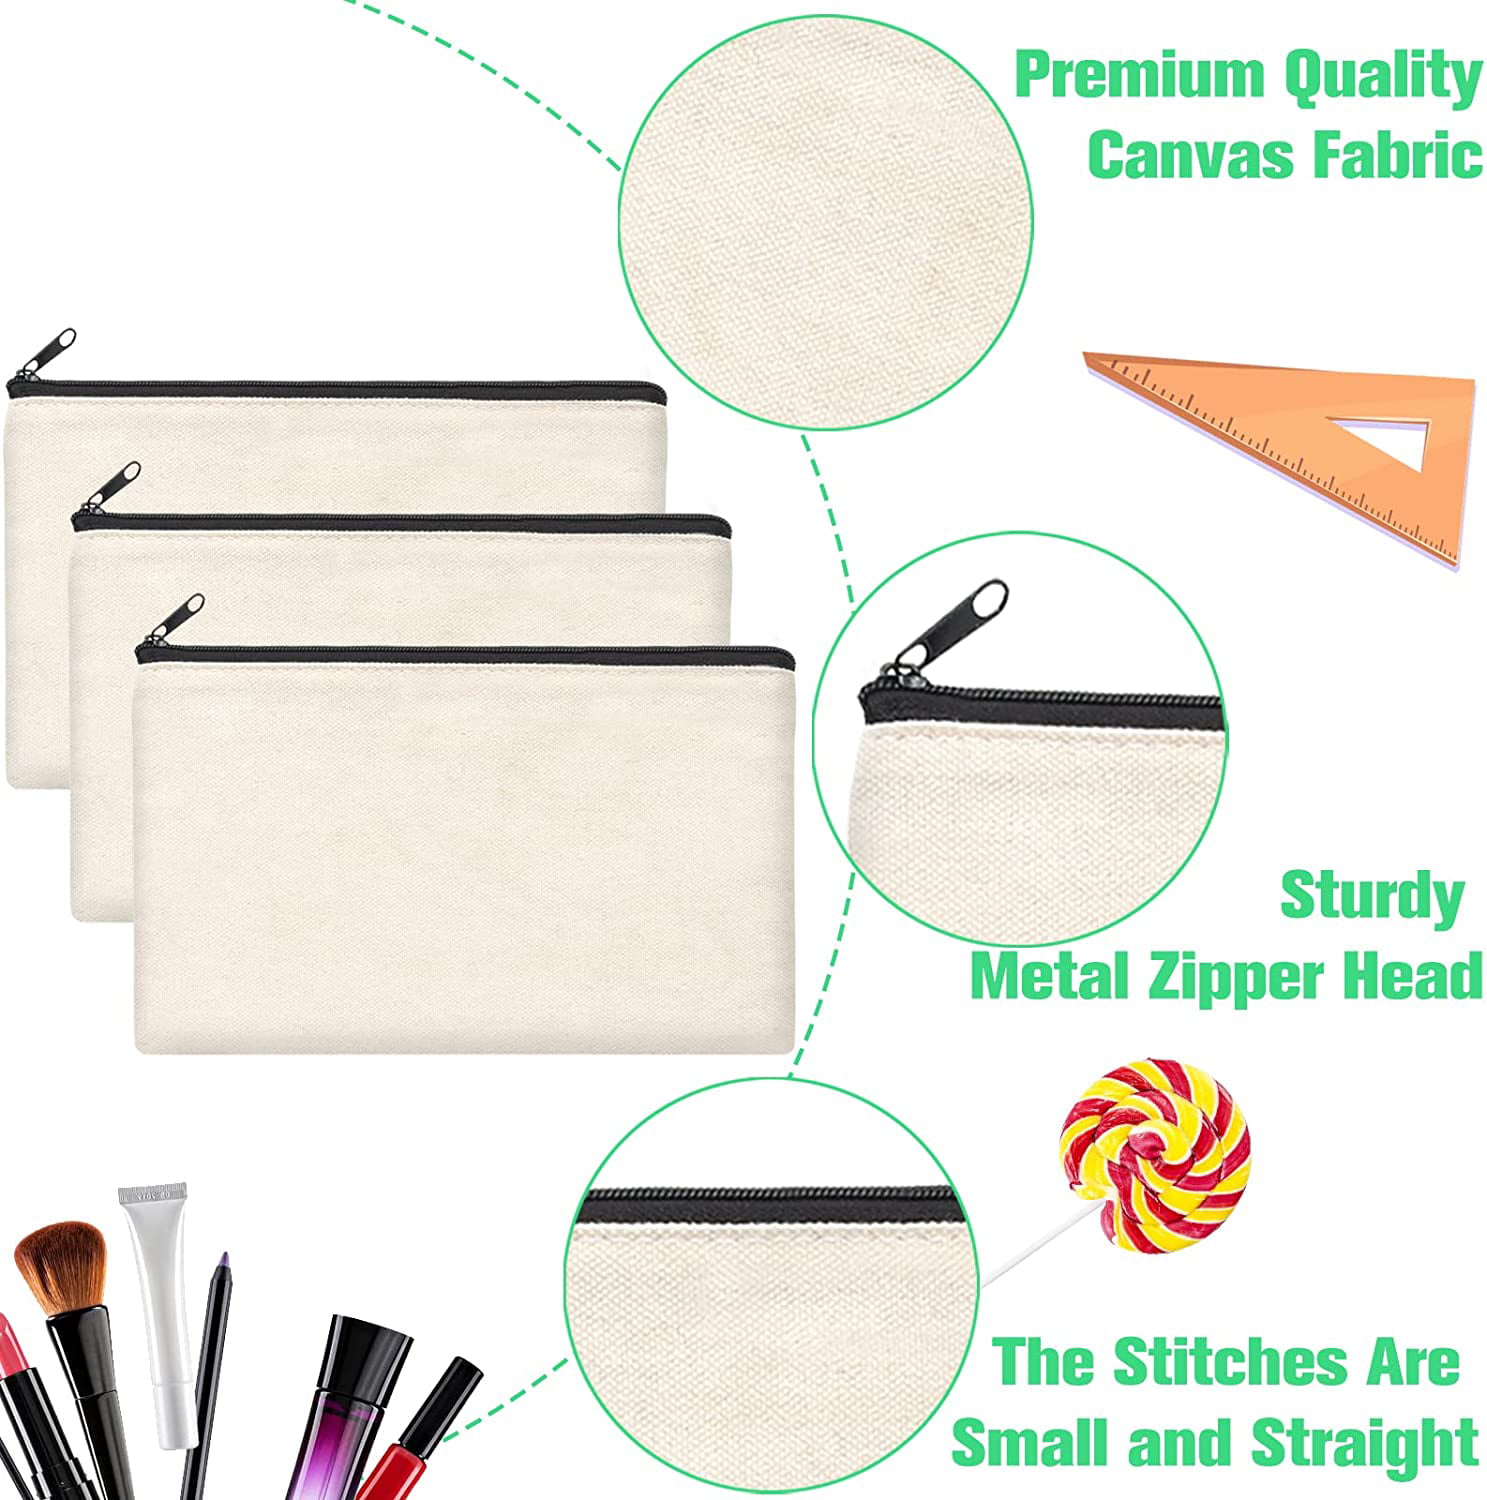 Wholesale Canvas Zipper Pouch Bags Makeup Pencil Case Blank DIY Craft For  Travel School Black From Tttingber, $14.95